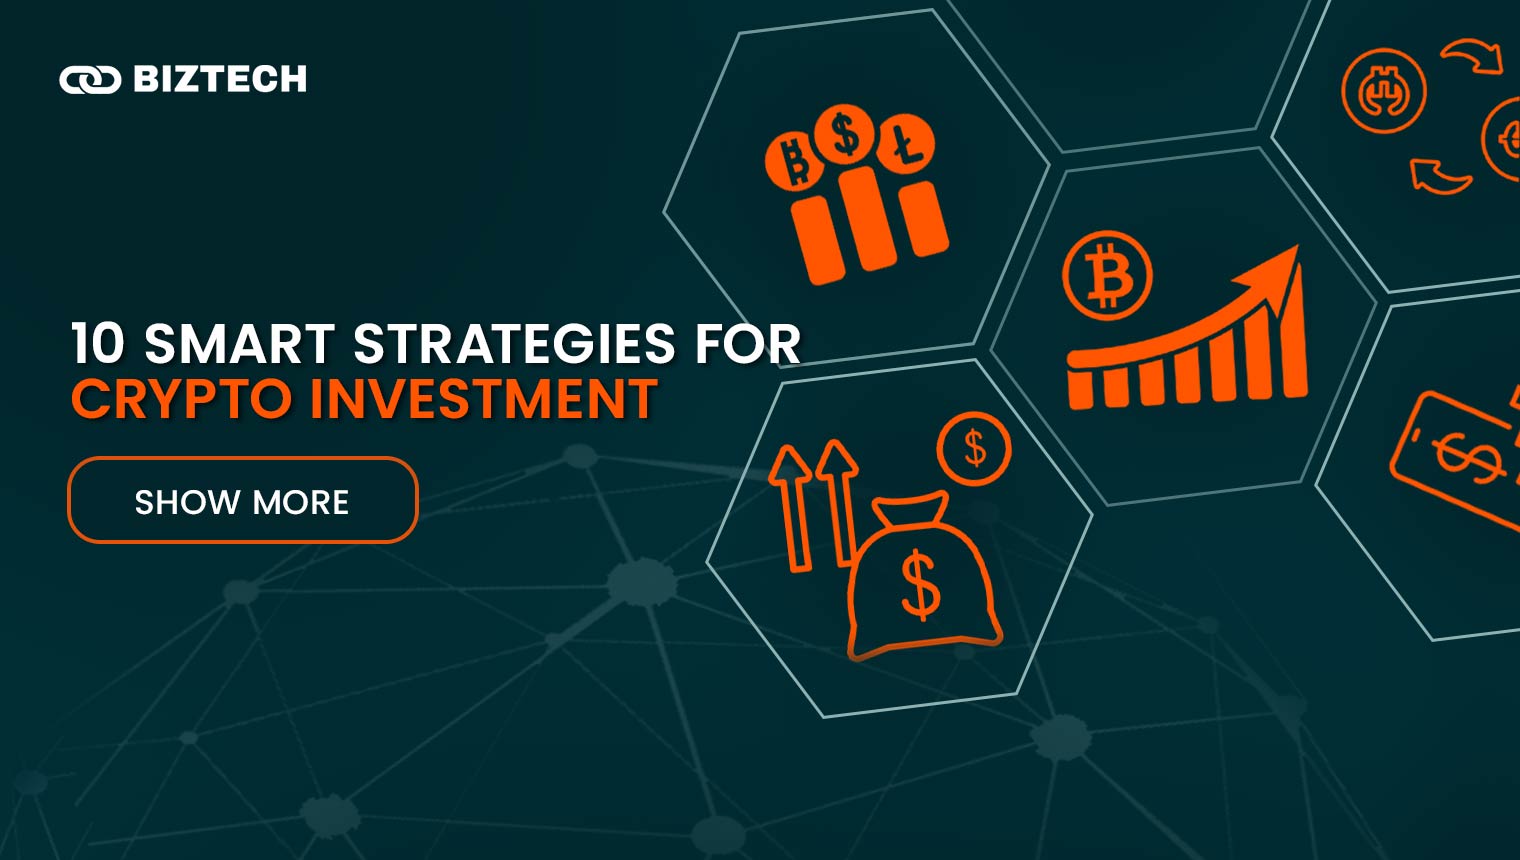 10 Smart Strategies for Crypto Investment